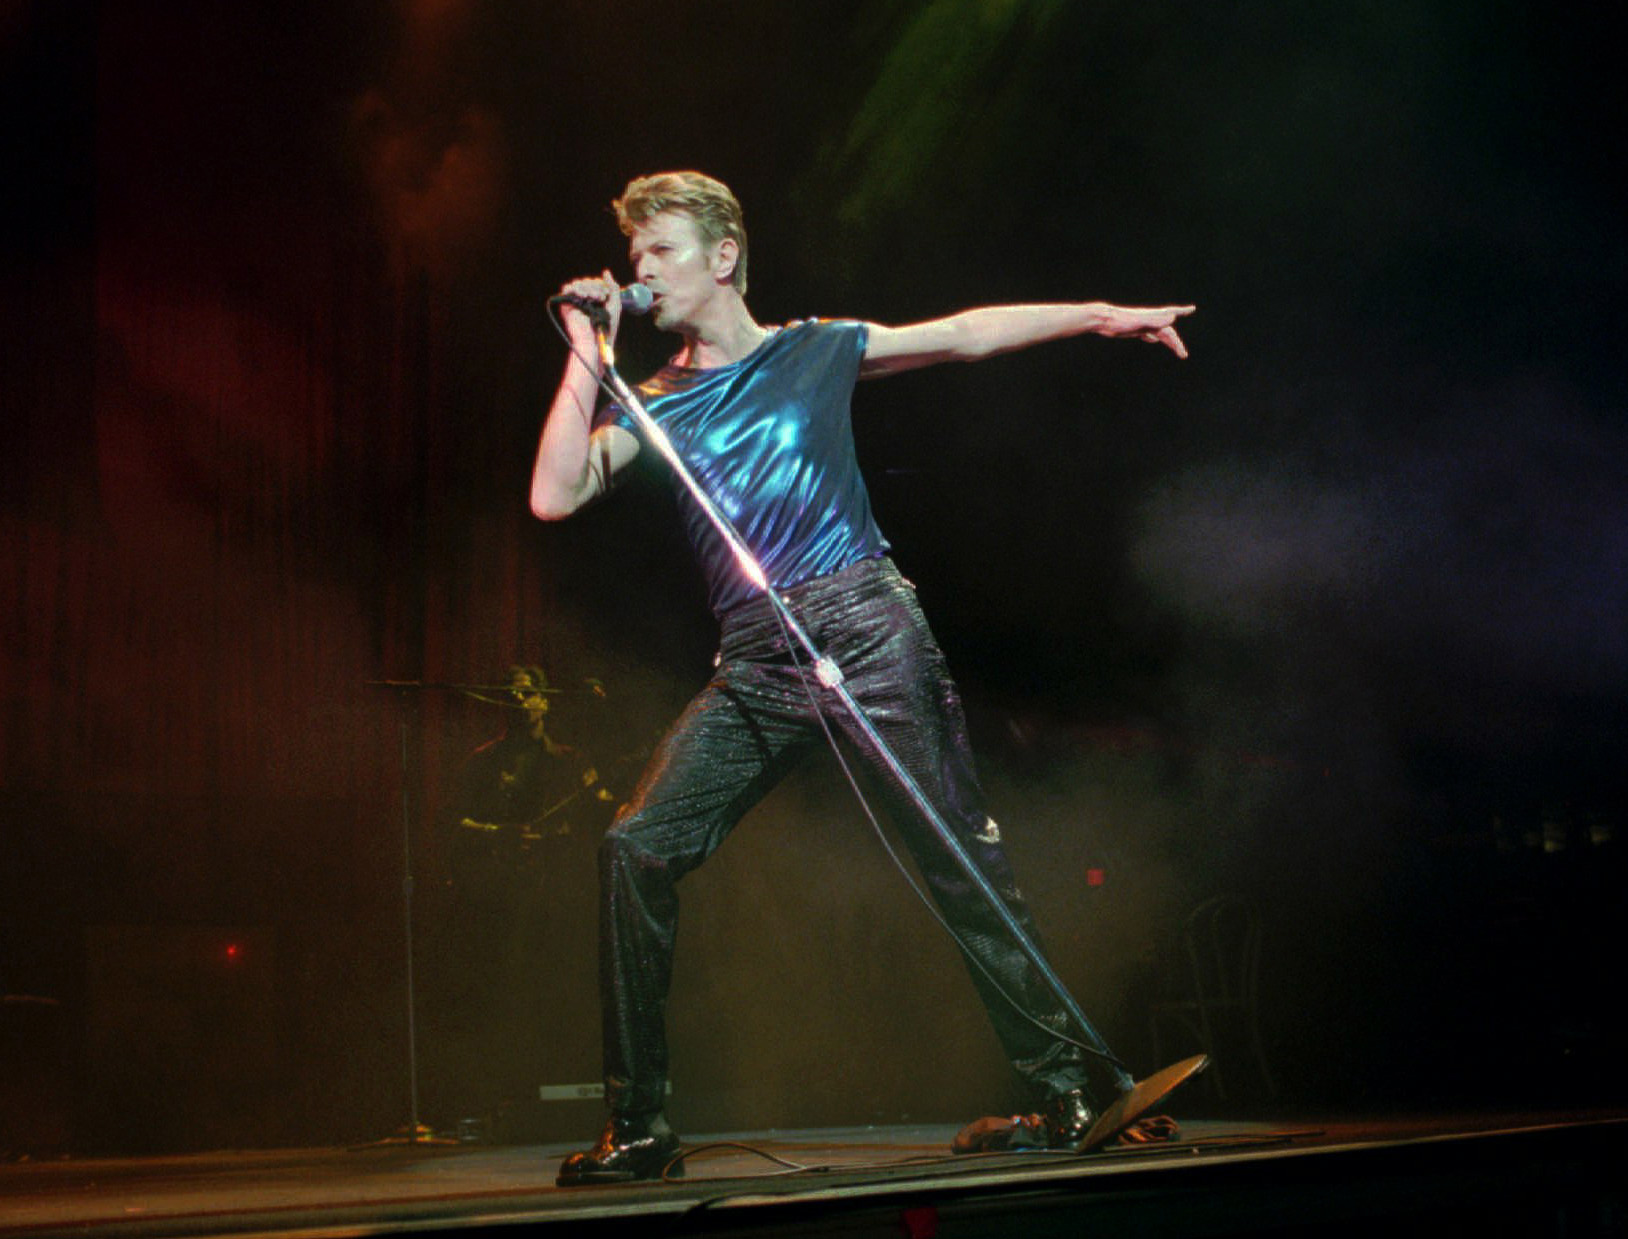 CORRECTS DATE OF DEATH TO SUNDAY, JAN. 10, 2016 - FILE - In this Sept. 14, 1995, file photo, David Bowie performs in Hartford, Conn. Bowie, the innovative and iconic singer whose illustrious career lasted five decades, died Sunday, Jan. 10, 2016, after battling cancer for 18 months. He was 69. (AP Photo/Bob Child, File)